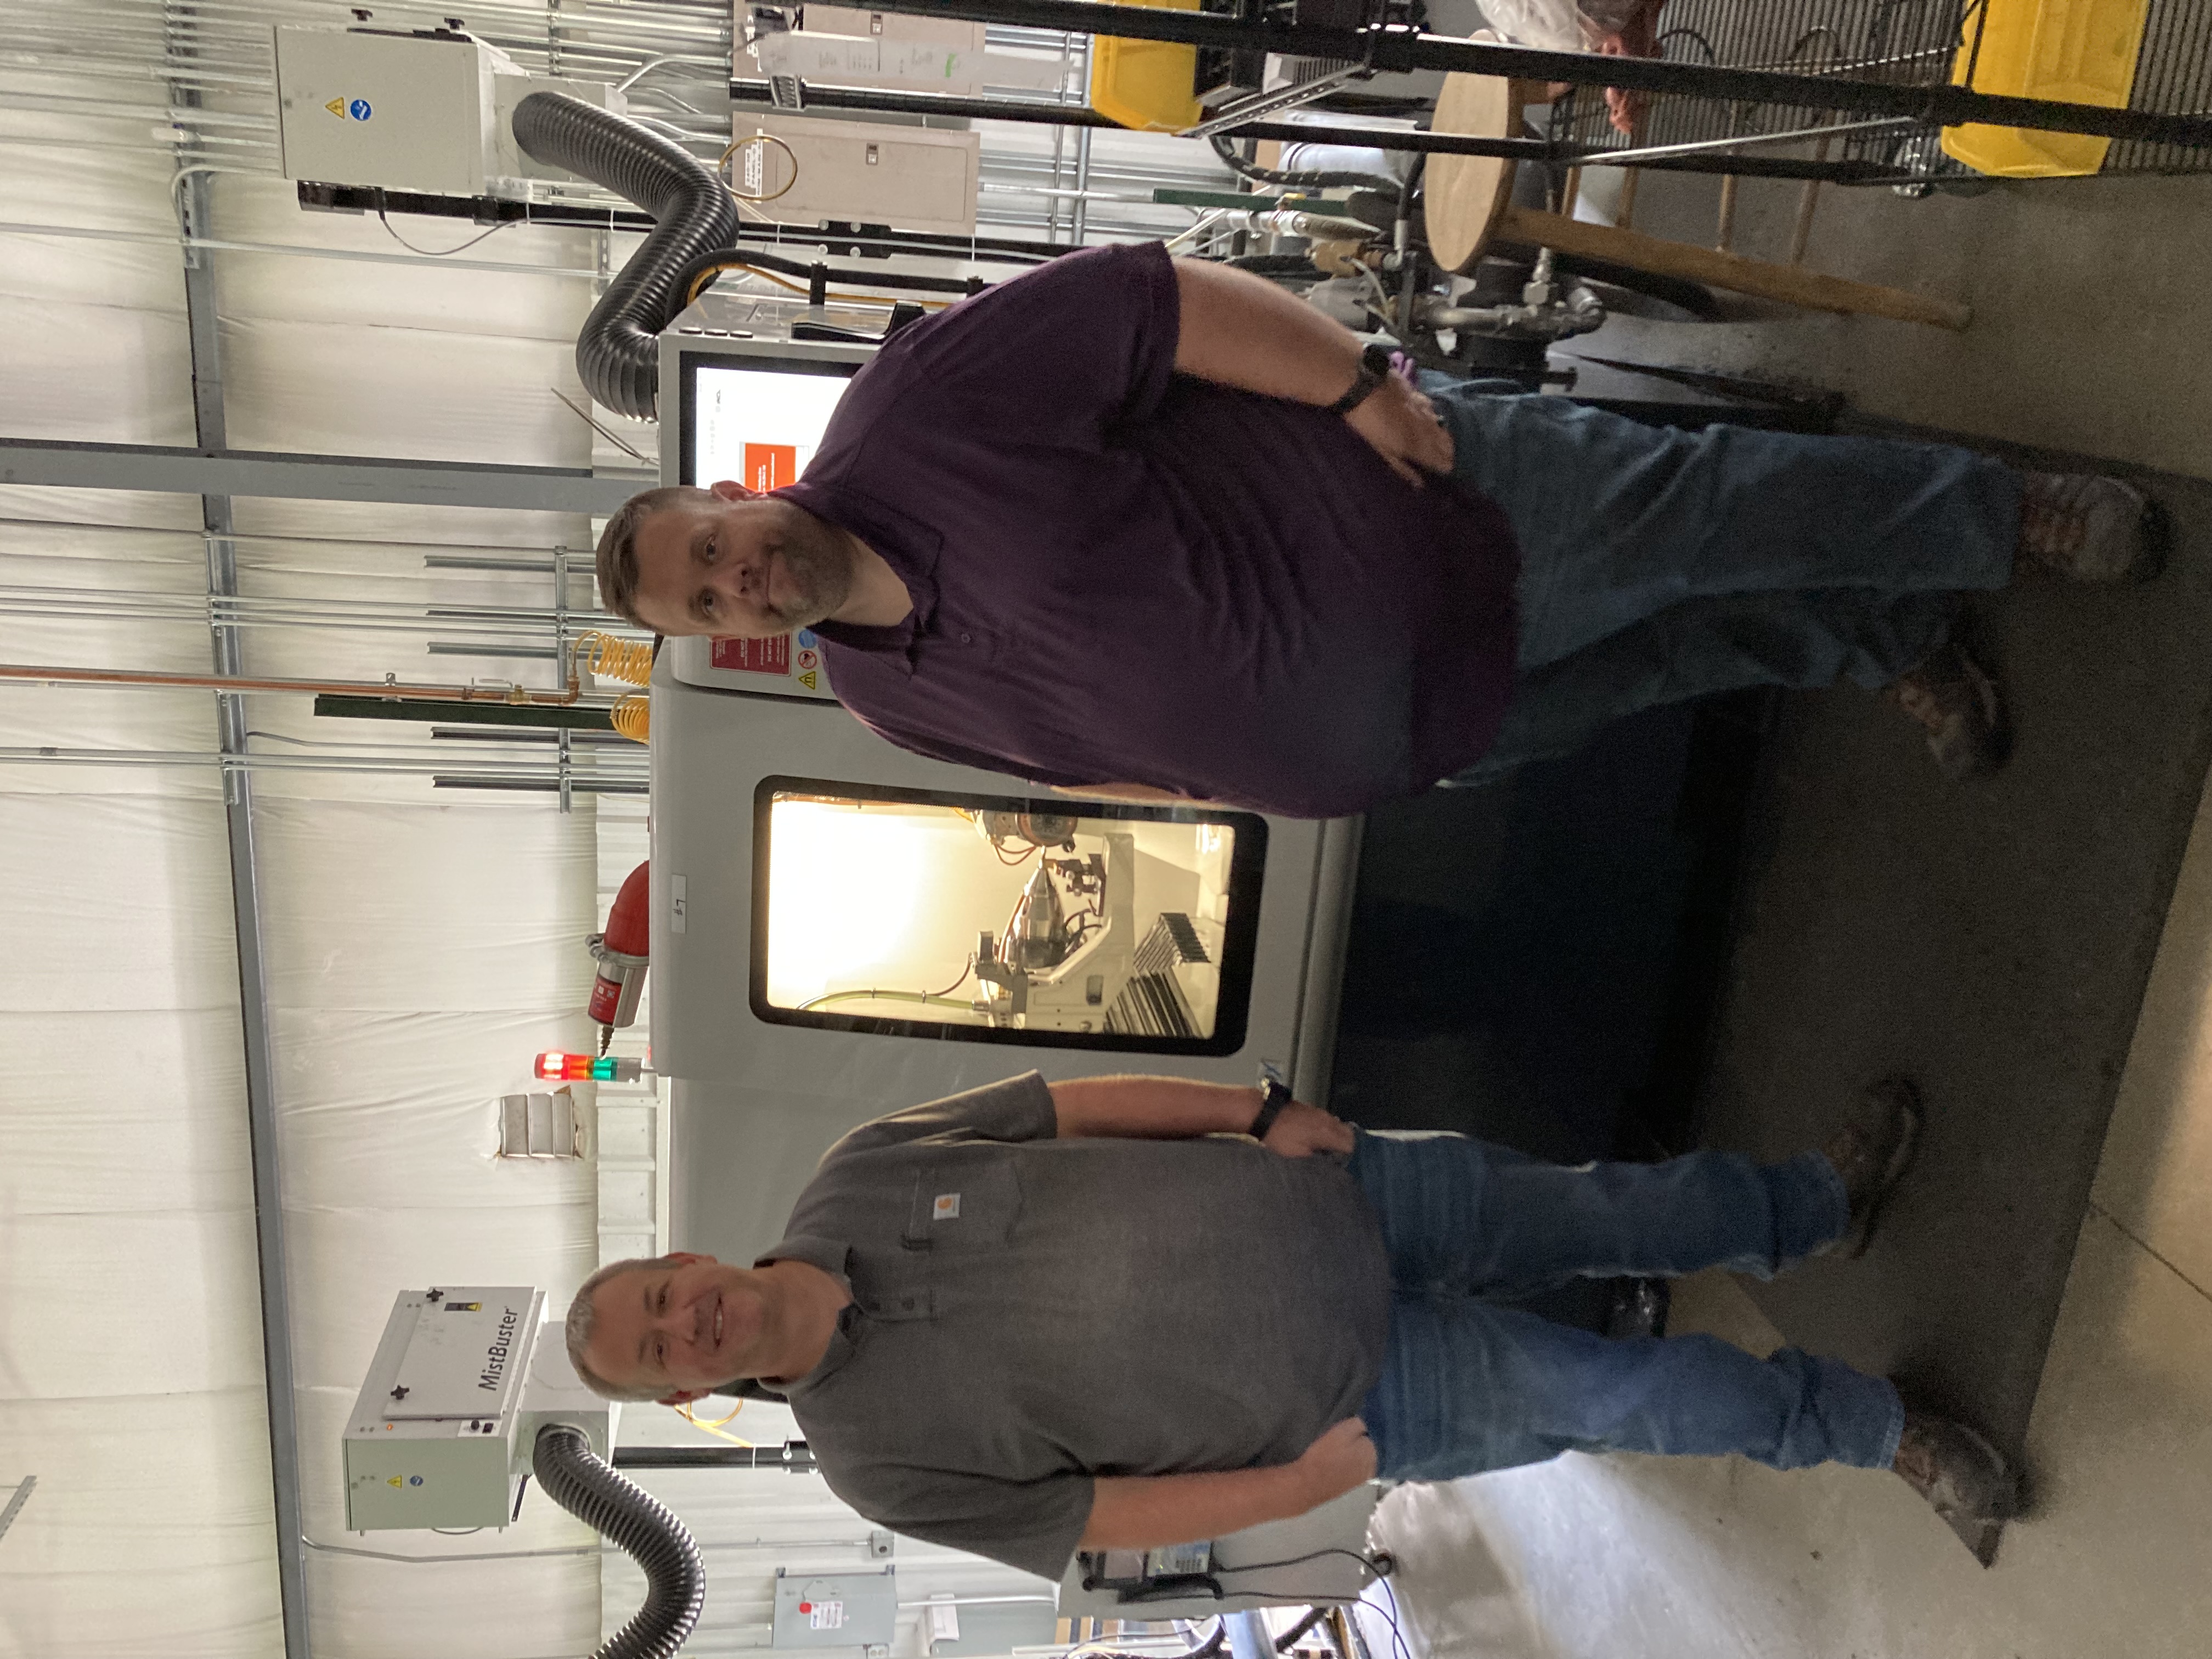 Tim (left) and Jason (right) Winters are co-owners of the company founded by their father Mike in 1982.